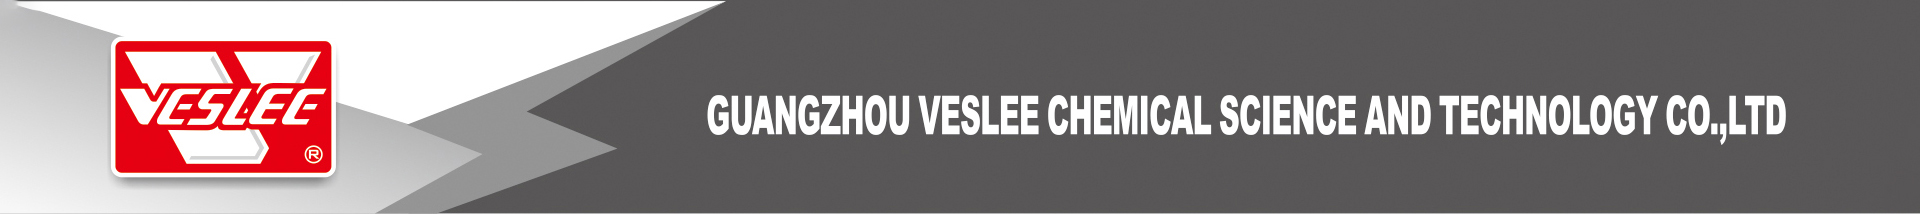  Guangzhou Veslee Chemical Science and Technology Co., Ltd 